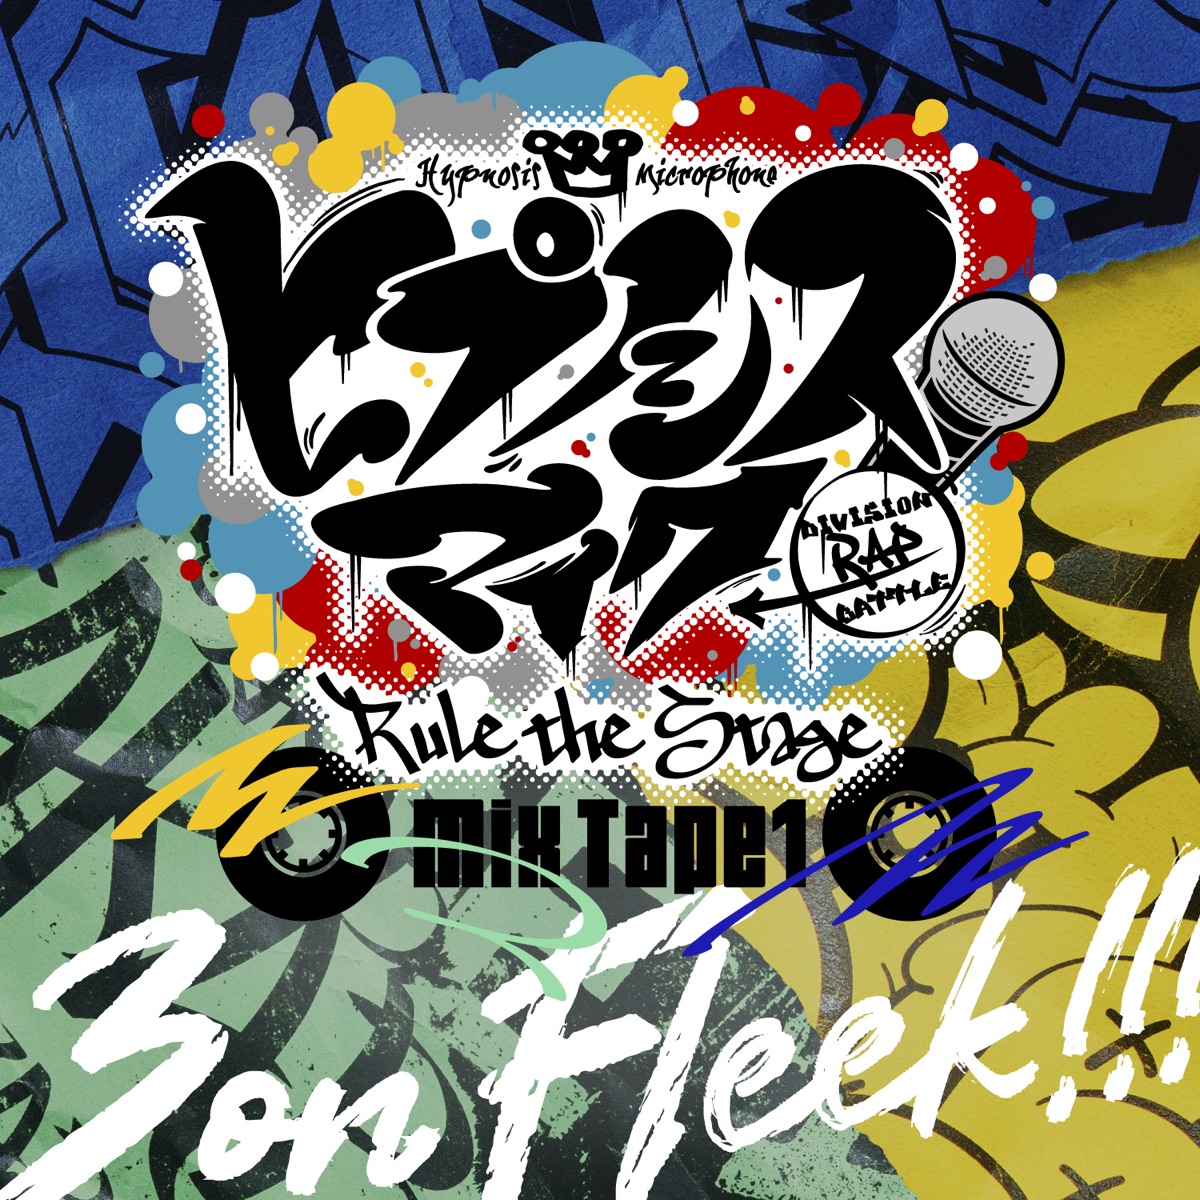 Cover art for『Hypnosis Mic -D.R.B- Rule the Stage (Mix Tape1 All Cast) - 3 on Fleek!!!』from the release『3 on Fleek!!!』